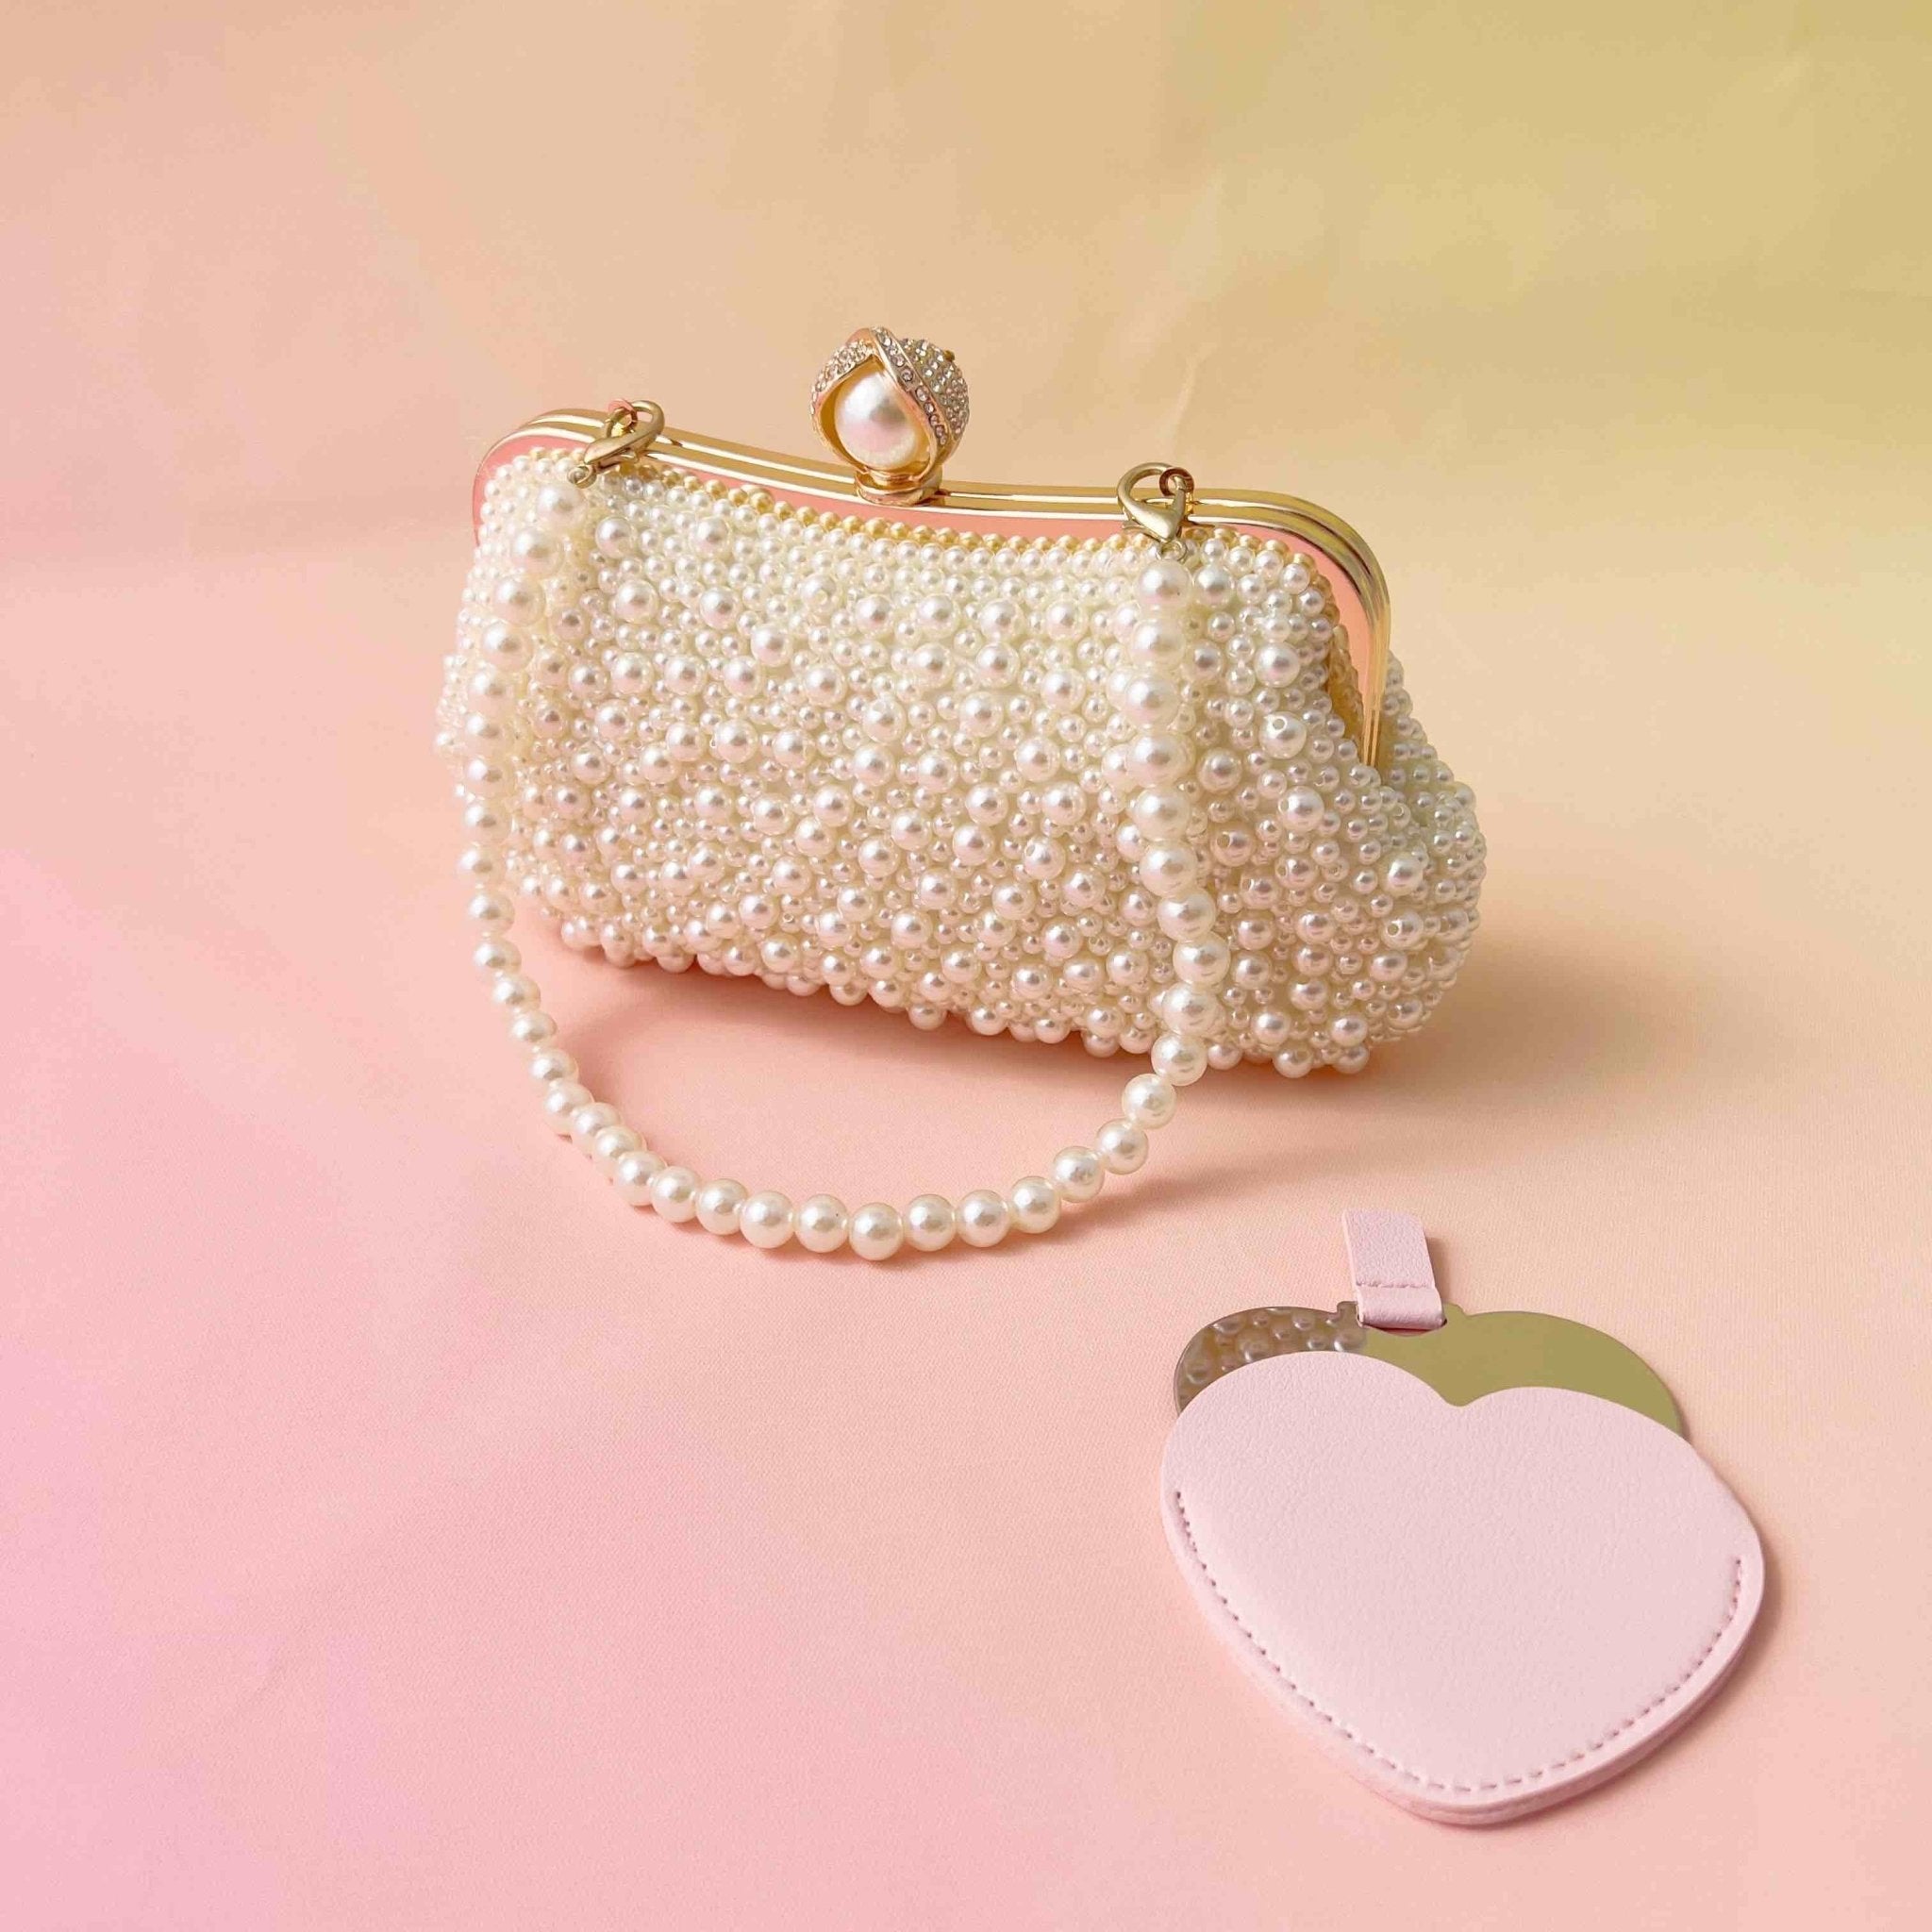 The True Love White Pearl Bridal Clutch | Clutch Pearl Evening – The Bella  Rosa Collection